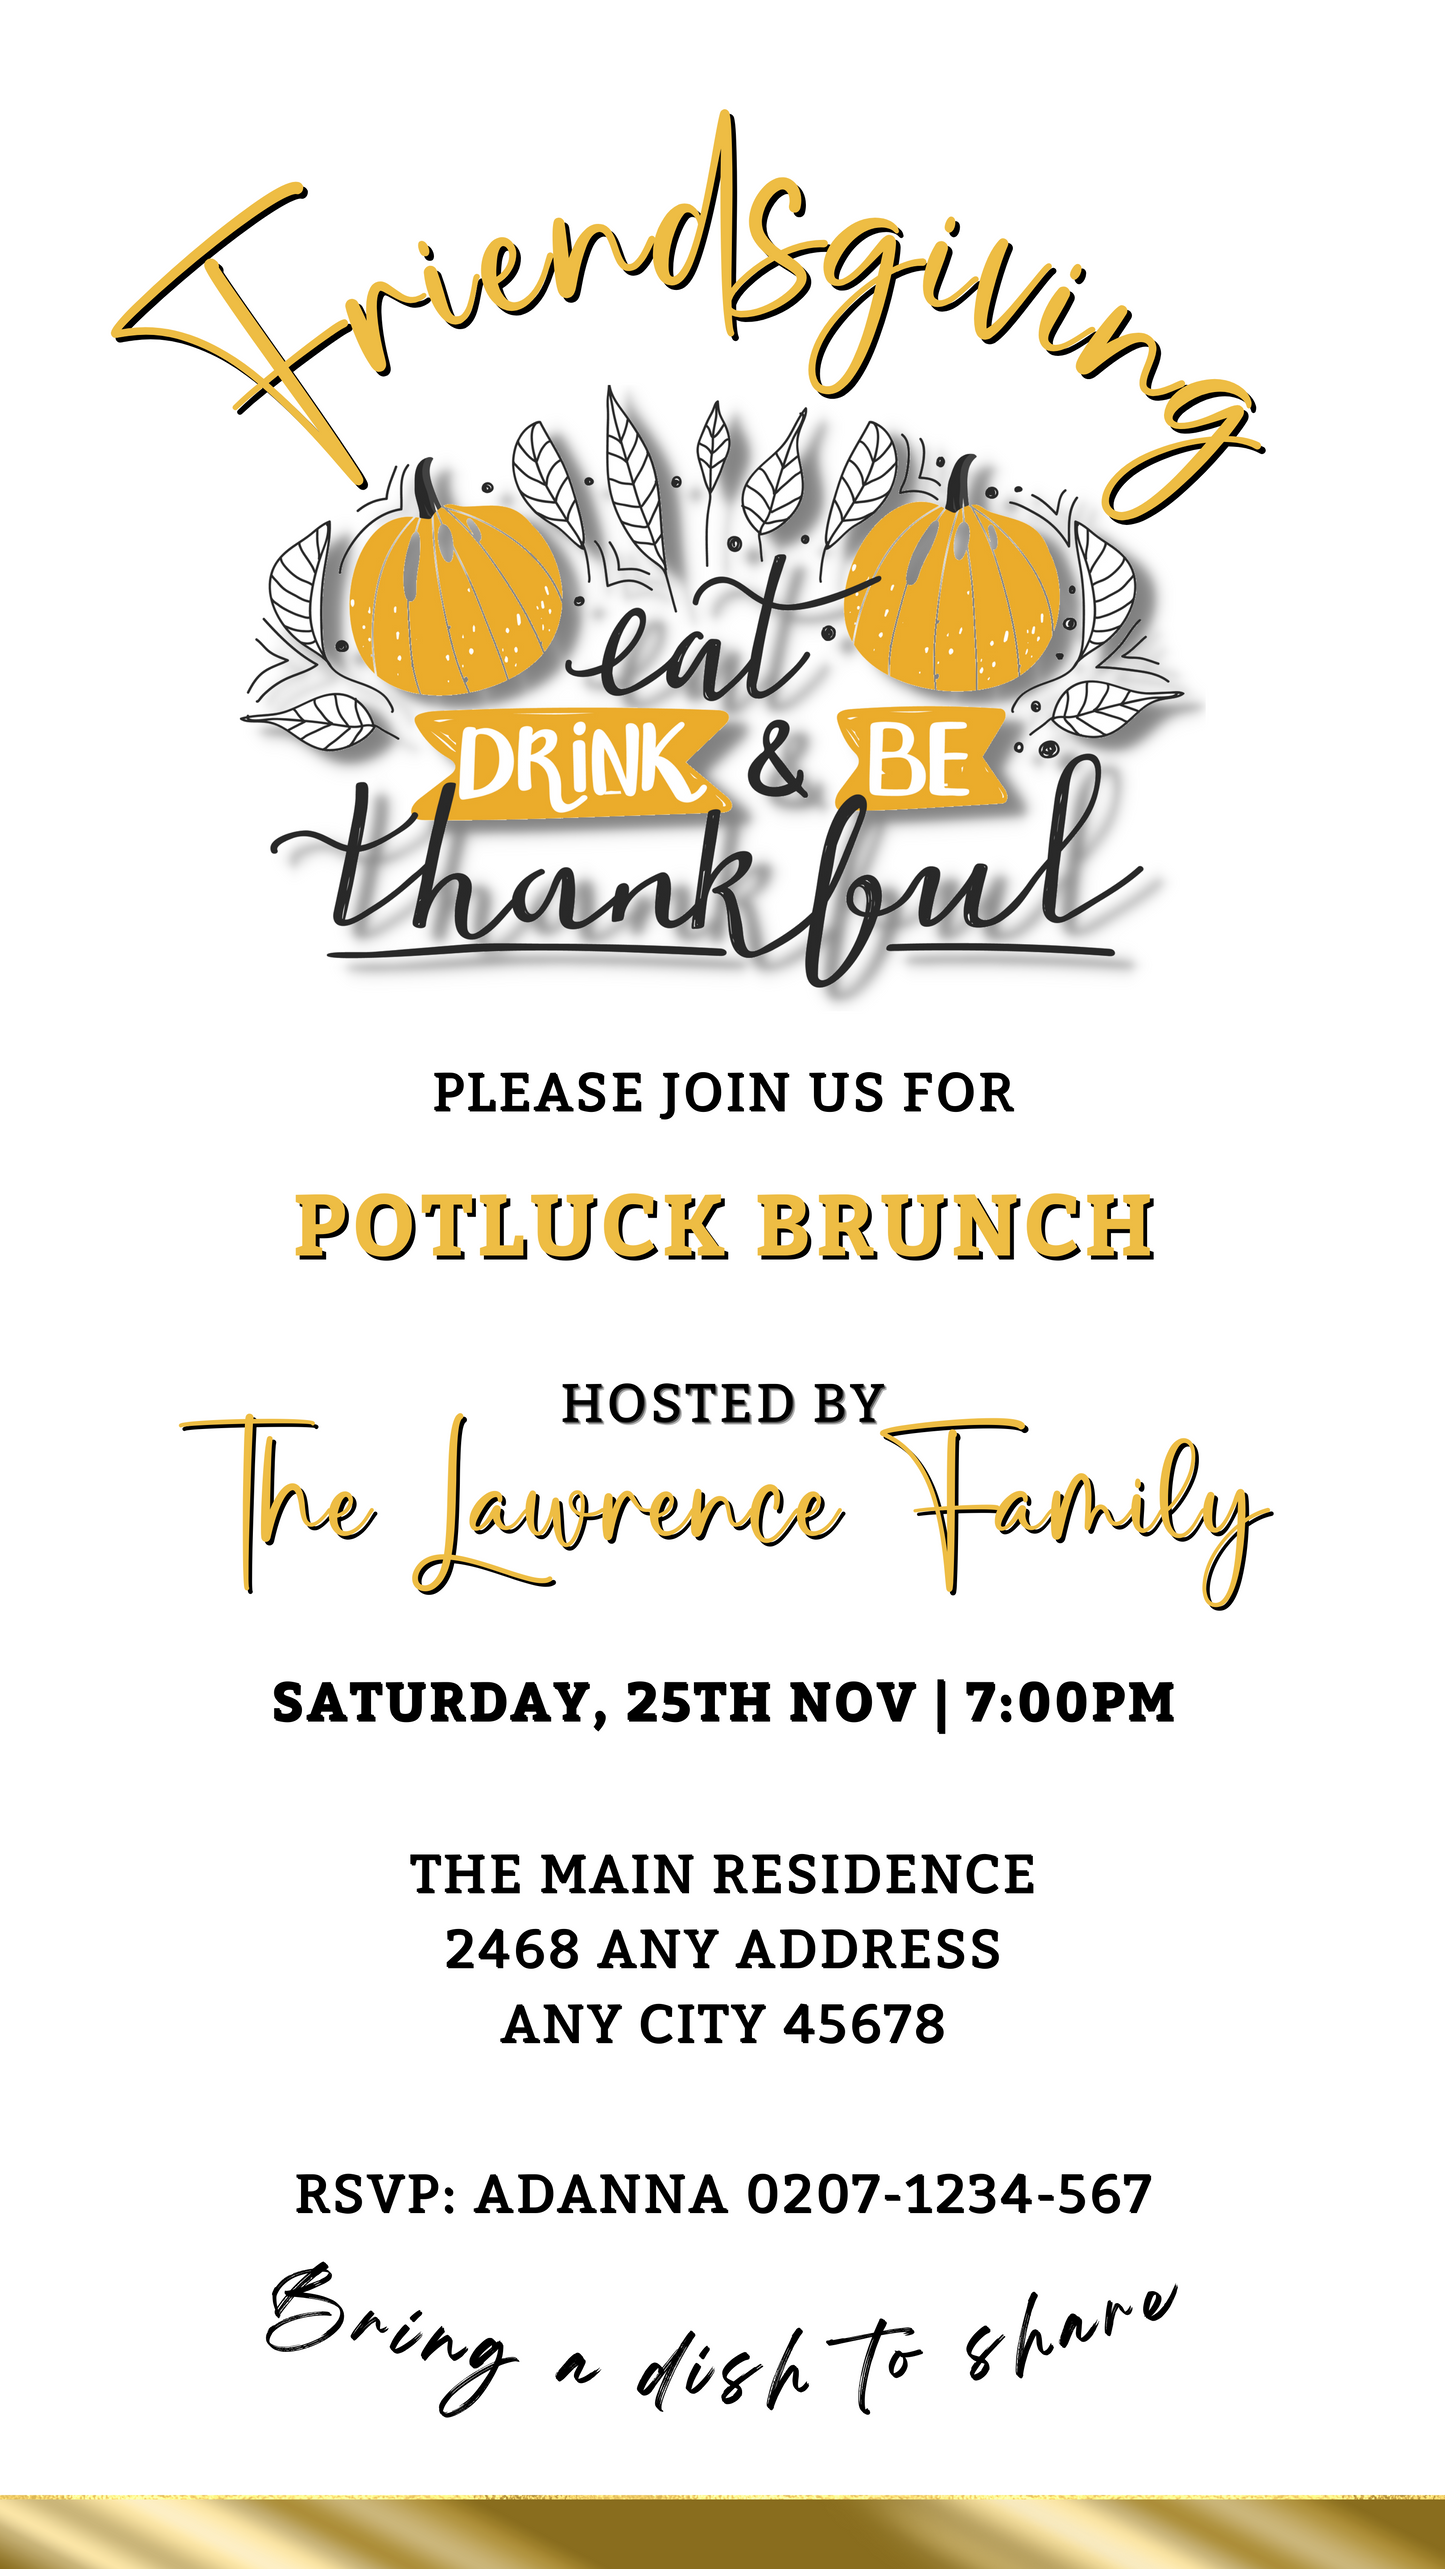 Elegant FriendsGiving Potluck | Thanksgiving Brunch Invitation featuring white and yellow design with oranges and text, editable via Canva for personalized digital sharing.